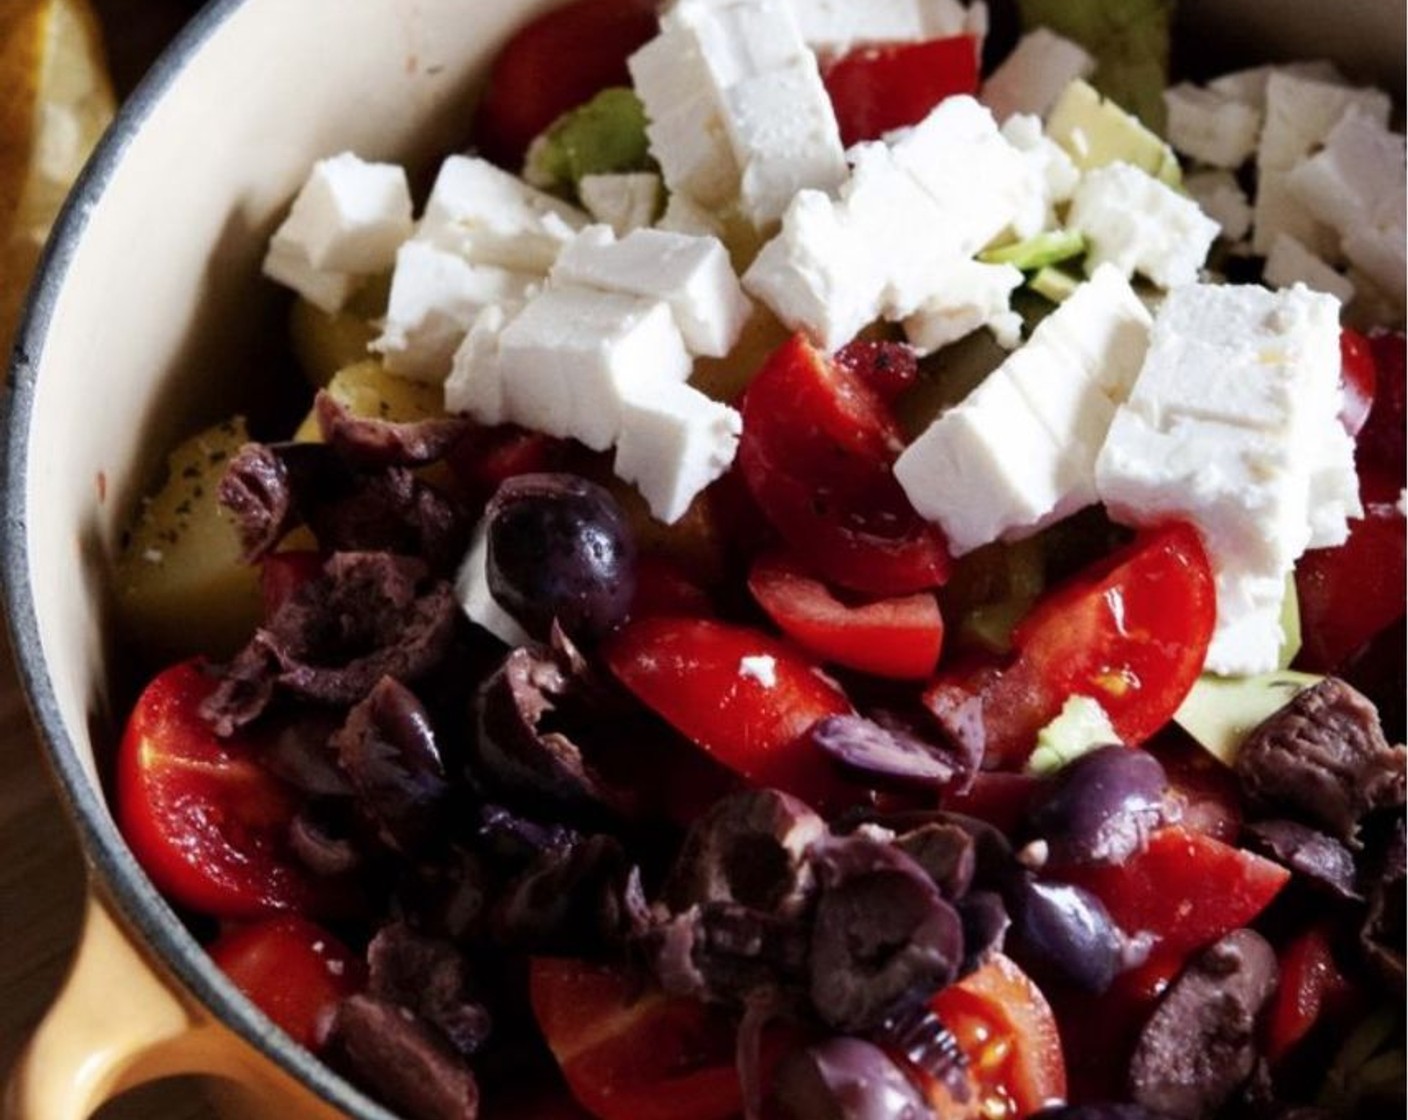 step 1 Into a large bowl, add Potatoes (4), Cherry Tomato (3/4 cup), Avocado (1/2), Kalamata Olives (1/3 cup), and Crumbled Feta Cheese (3/4 cup).